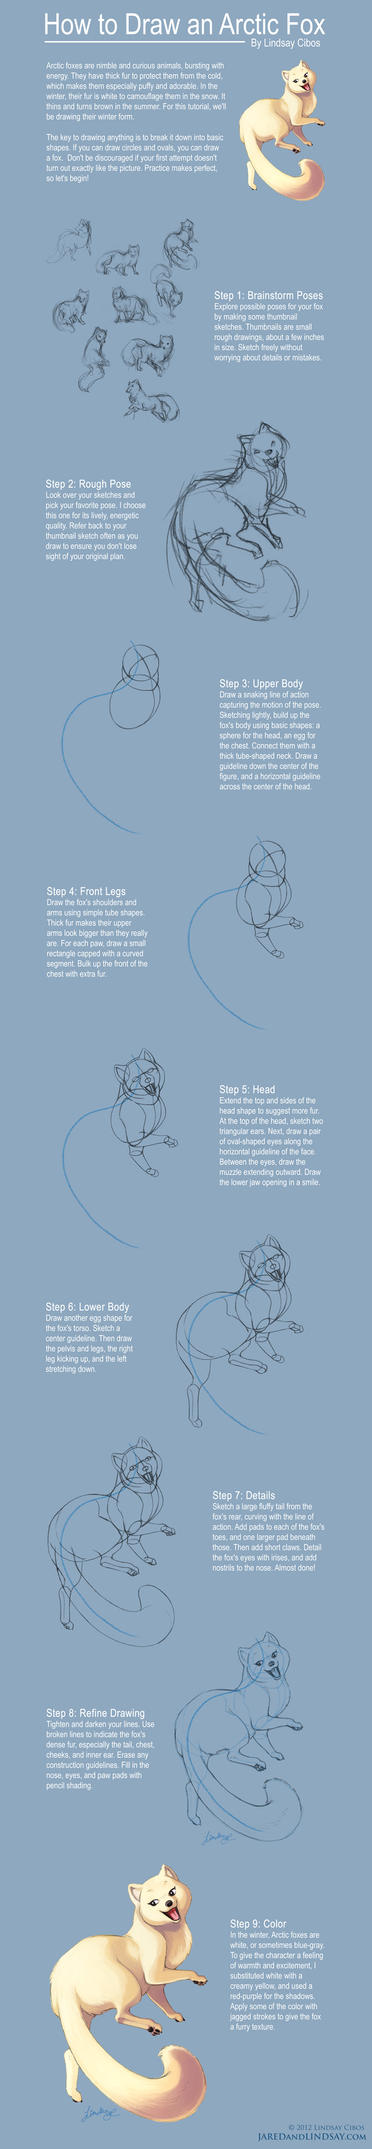 How to Draw an Arctic Fox by LCibos on DeviantArt